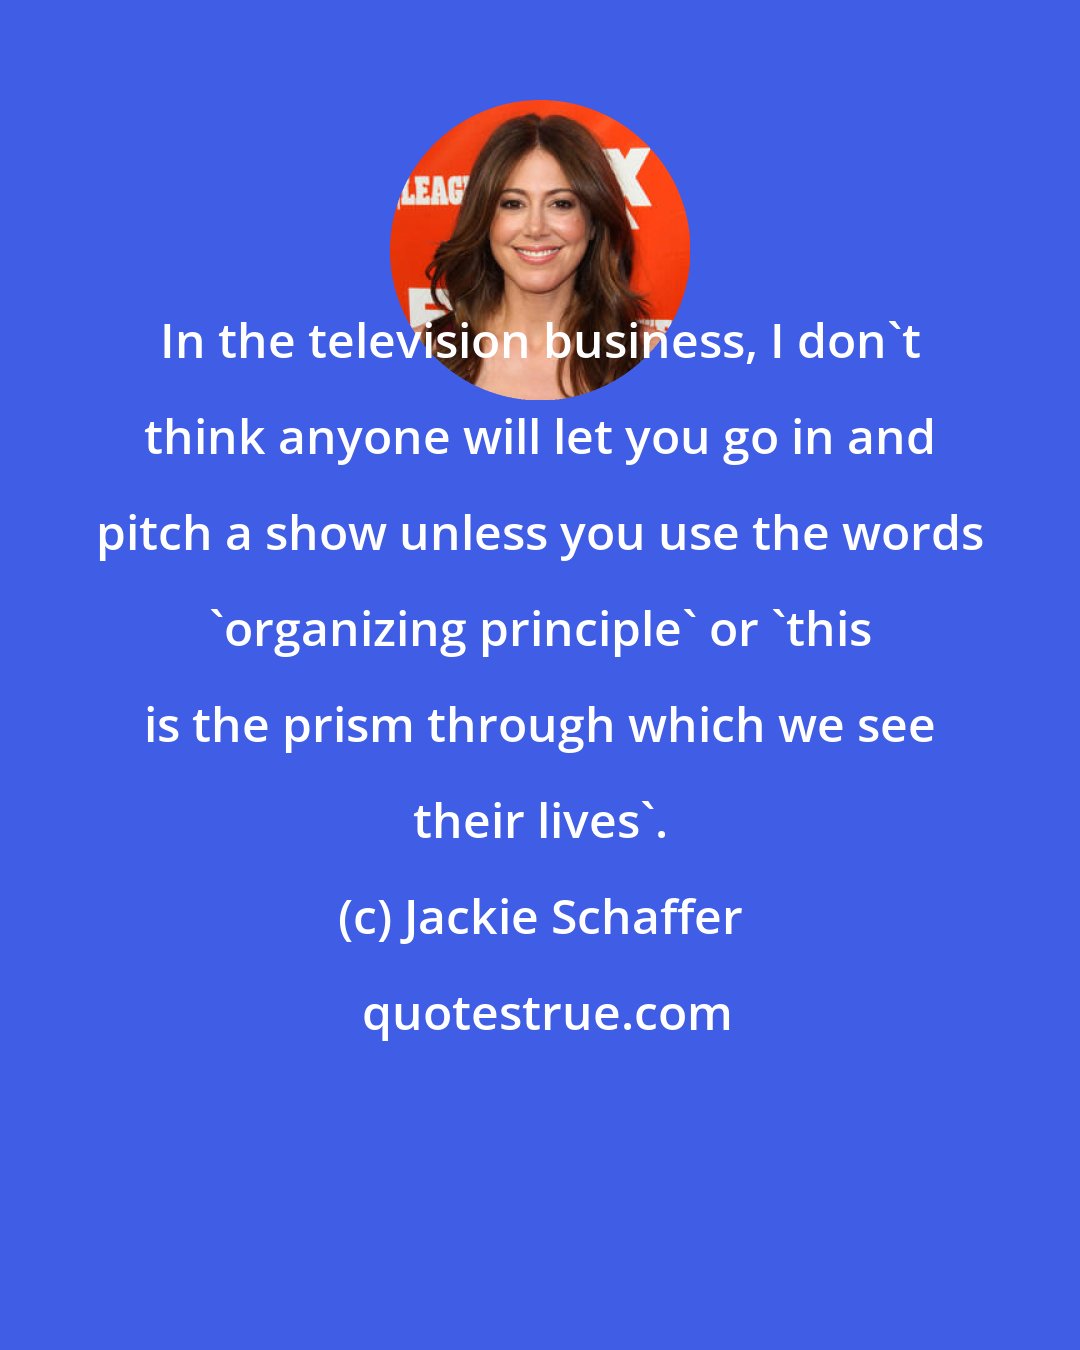 Jackie Schaffer: In the television business, I don't think anyone will let you go in and pitch a show unless you use the words 'organizing principle' or 'this is the prism through which we see their lives'.